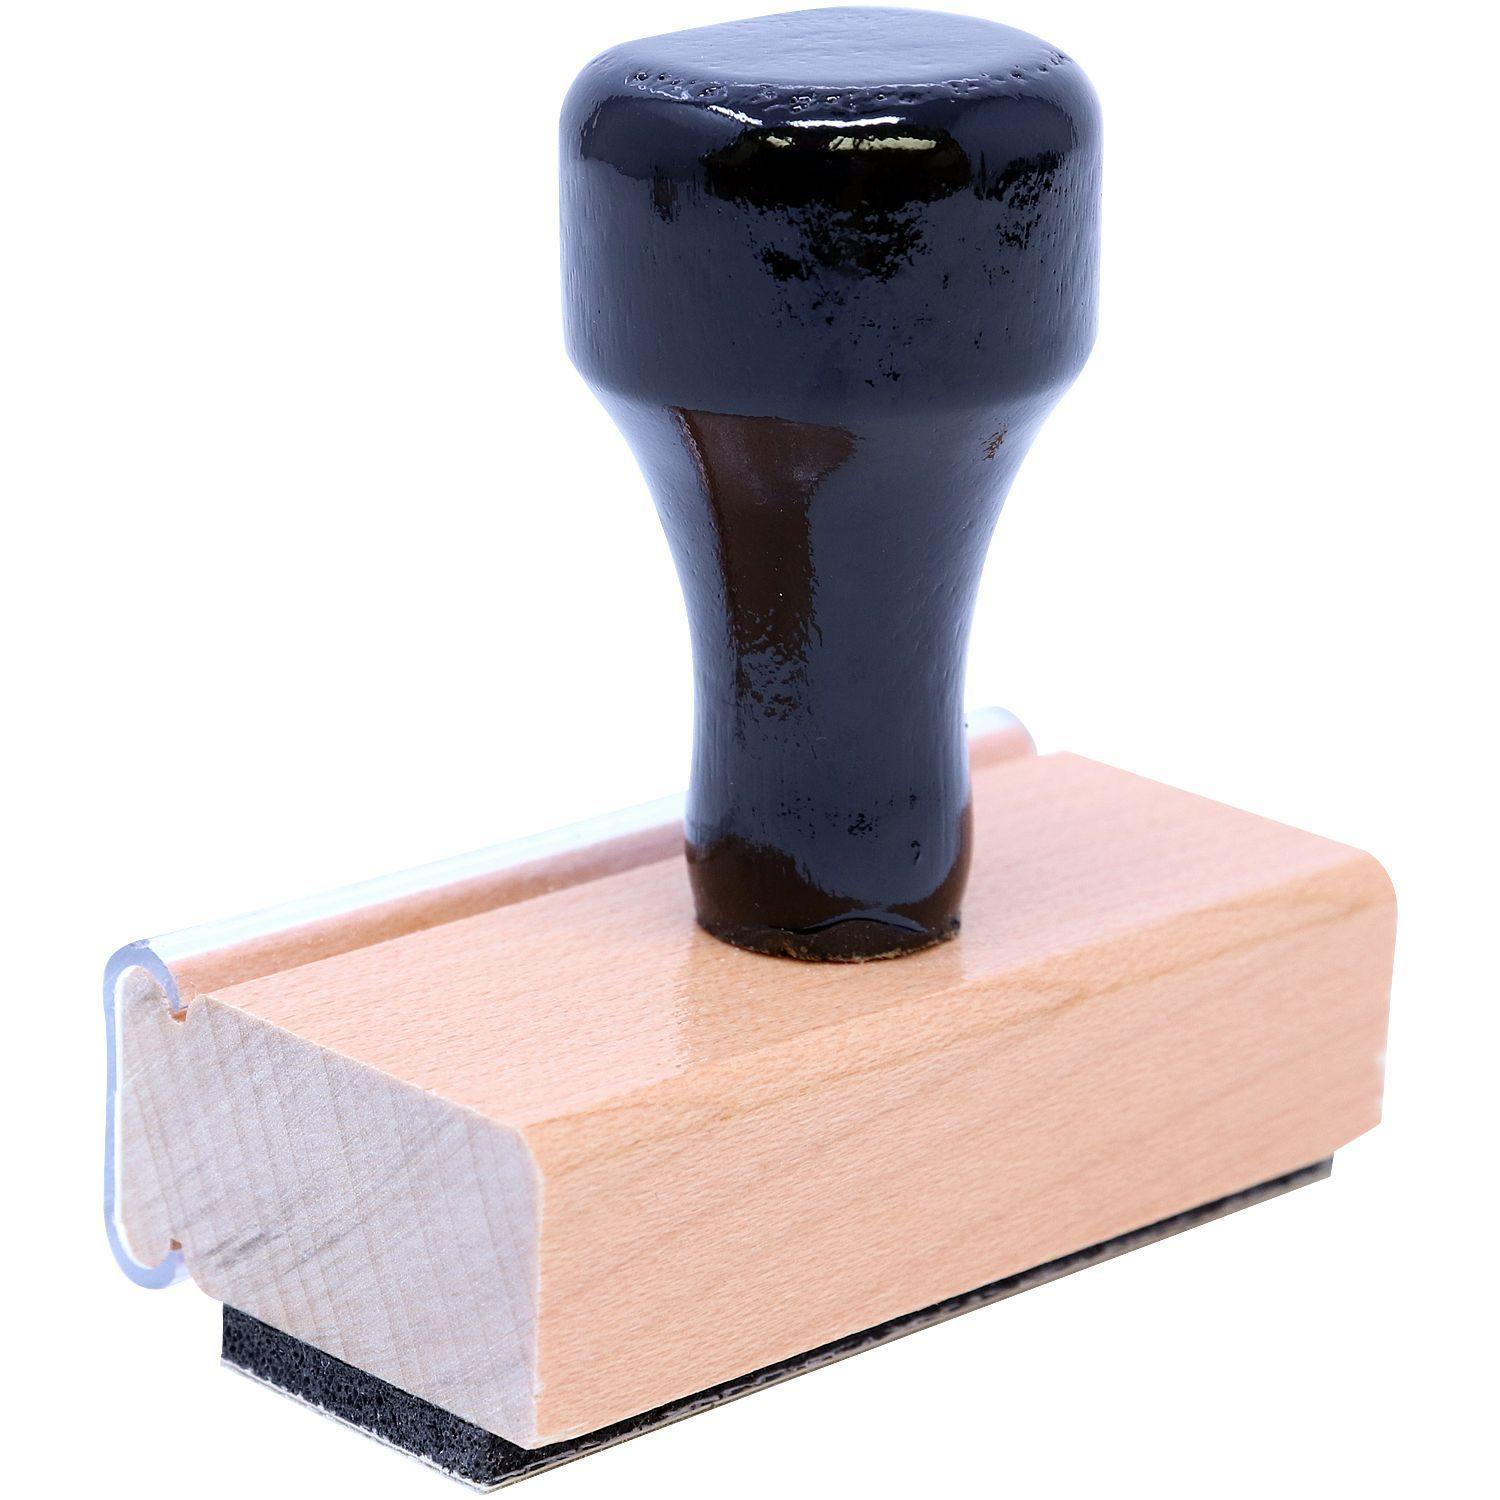 Narrow First Class Mail Rubber Stamp - Engineer Seal Stamps - Brand_Acorn, Impression Size_Small, Stamp Type_Regular Stamp, Type of Use_Business, Type of Use_Office, Type of Use_Postal & Mailing, Type of Use_Professional